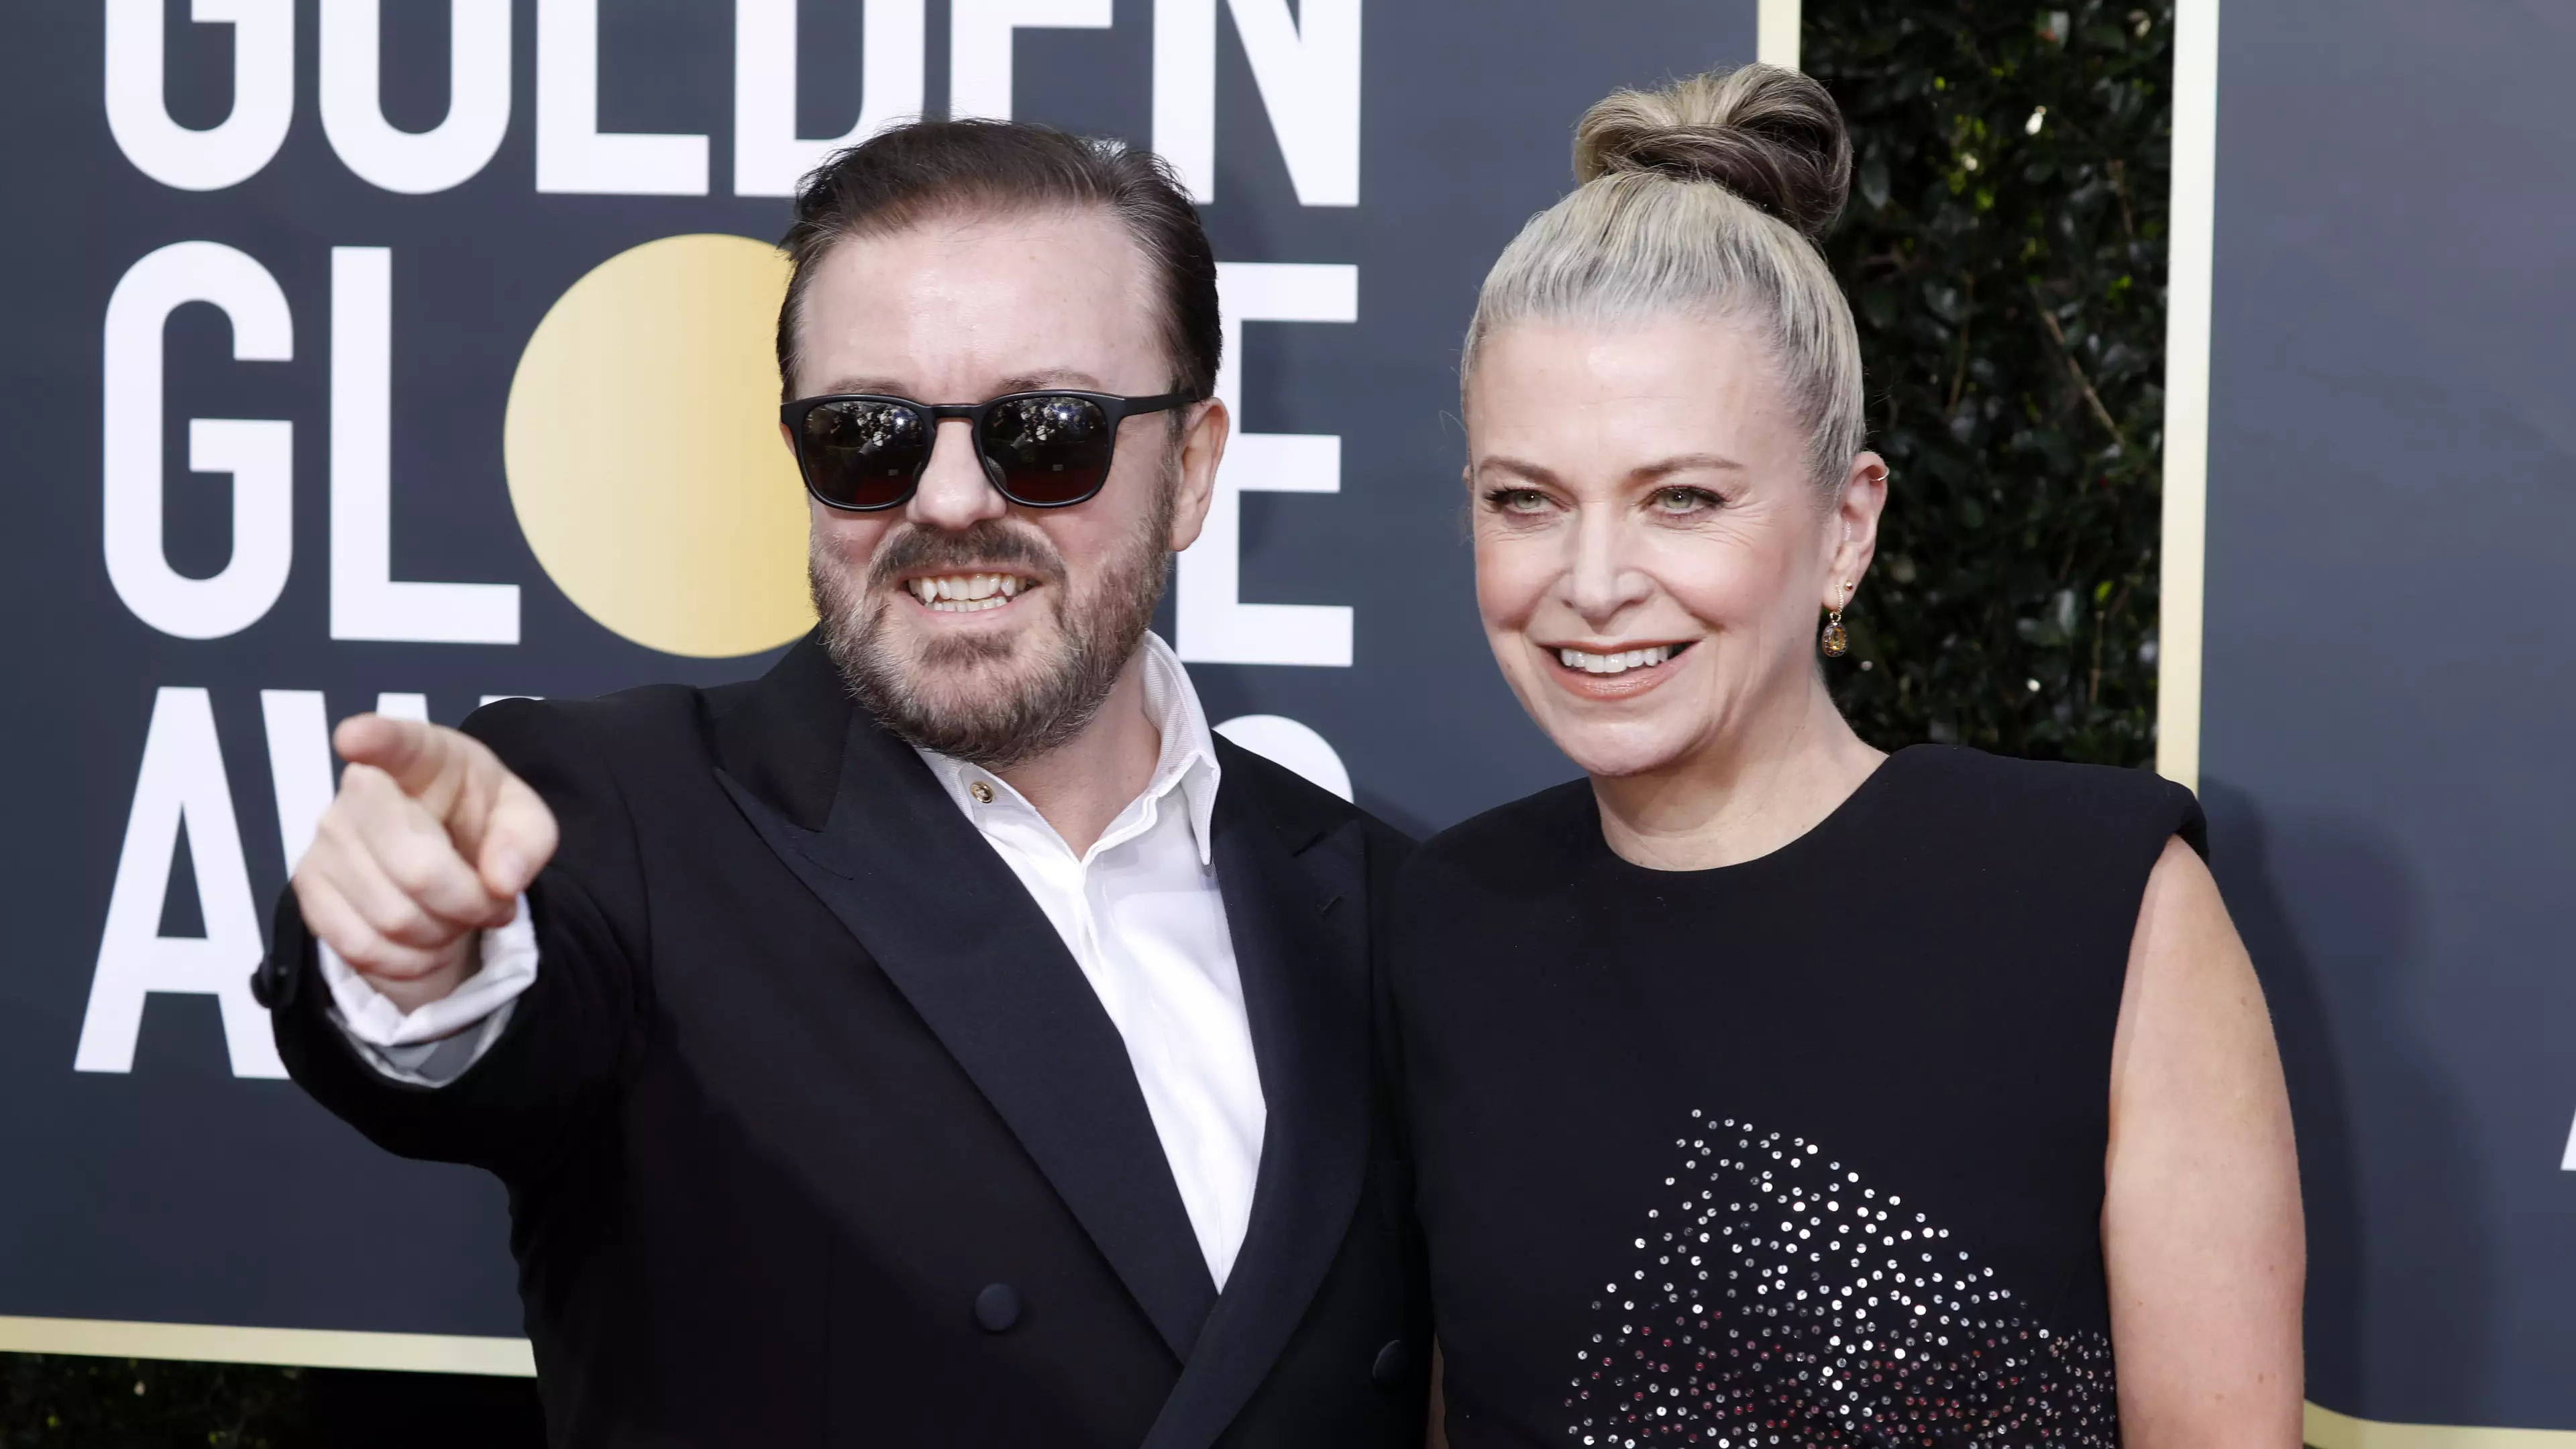 Ricky Gervais Shares Opening Joke He'd Use If He Was Hosting Oscars